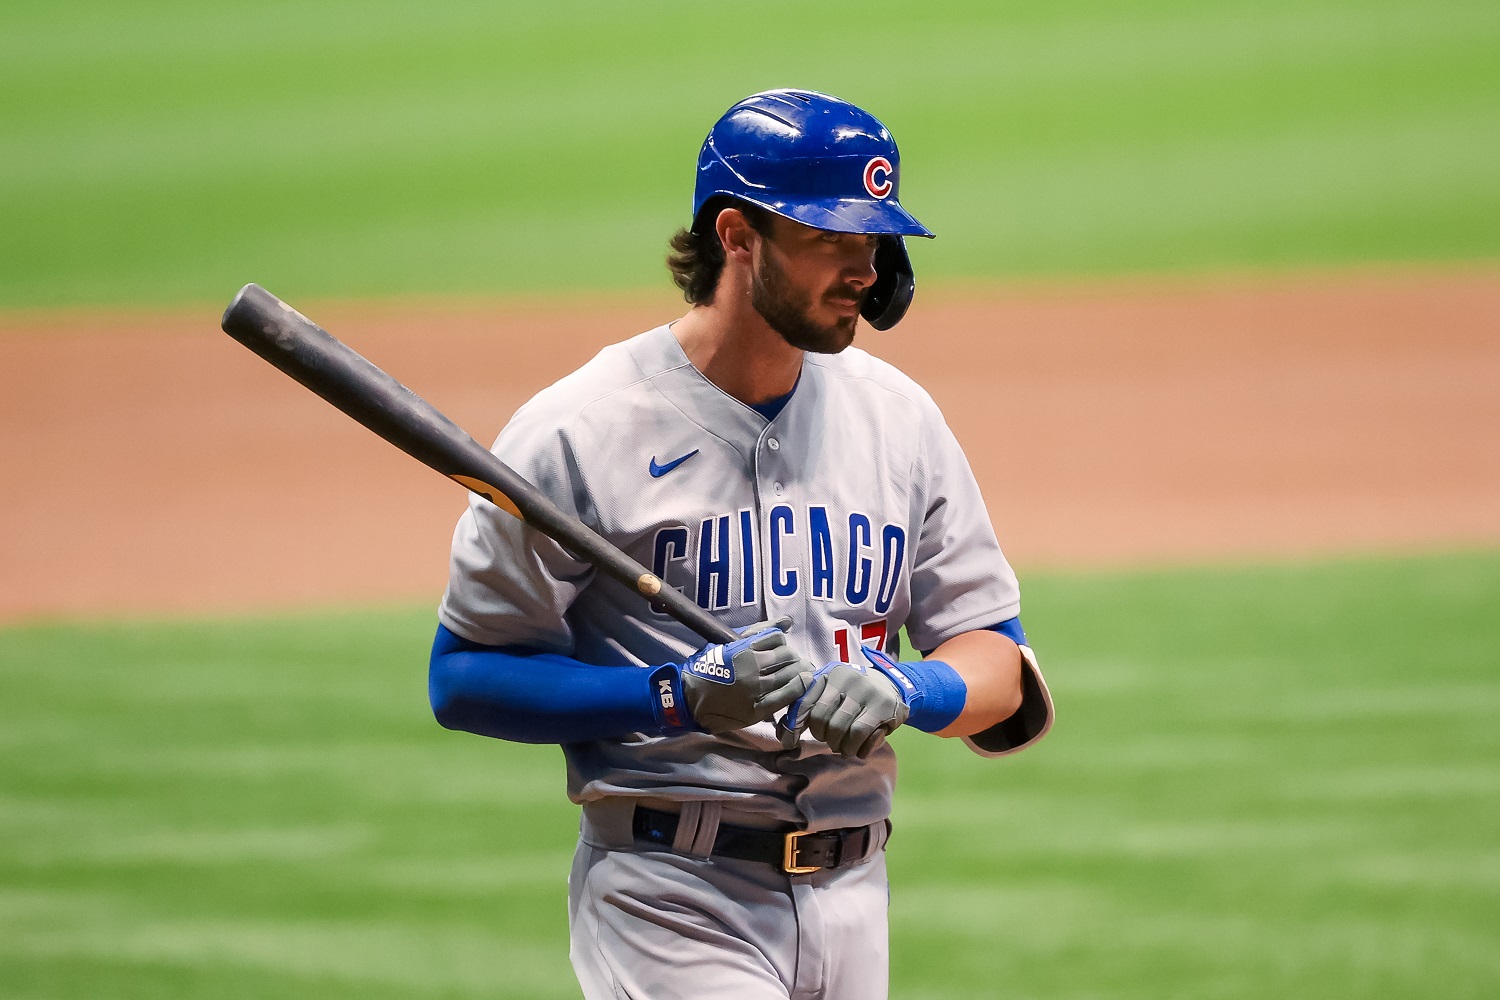 How Concerned Should the Chicago Cubs Be About Kris Bryant?